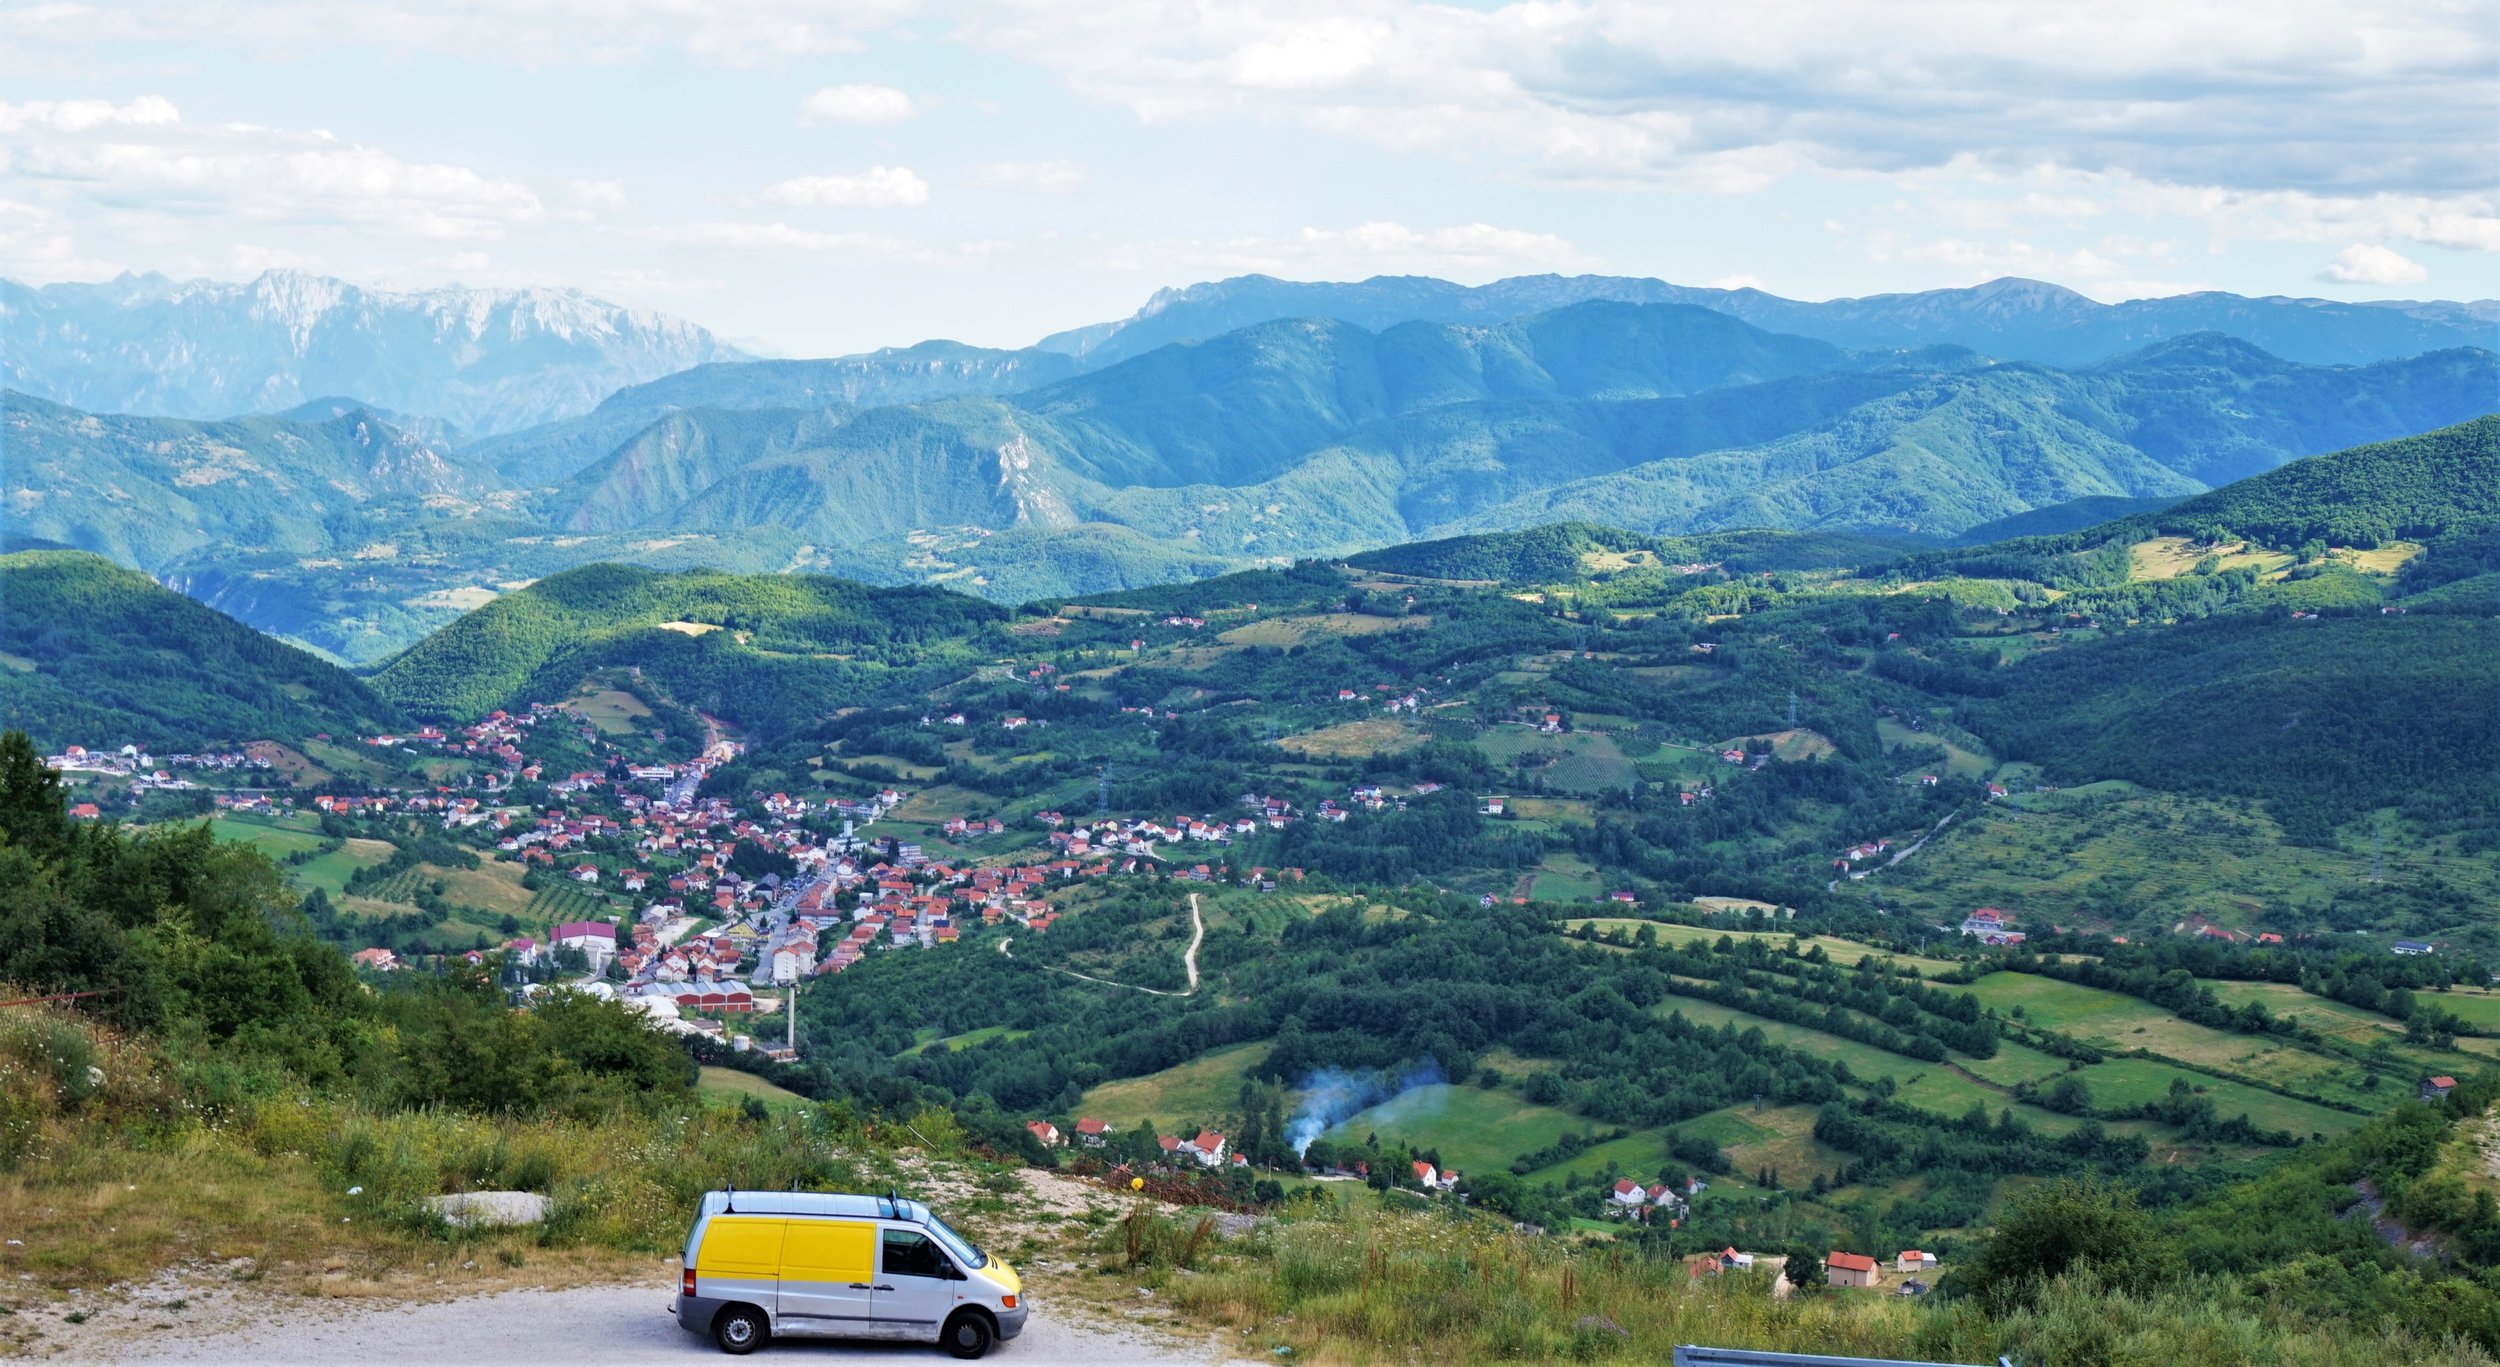 Ultimate Balkan Road Trip Itinerary: Best Places to See in the Balkans